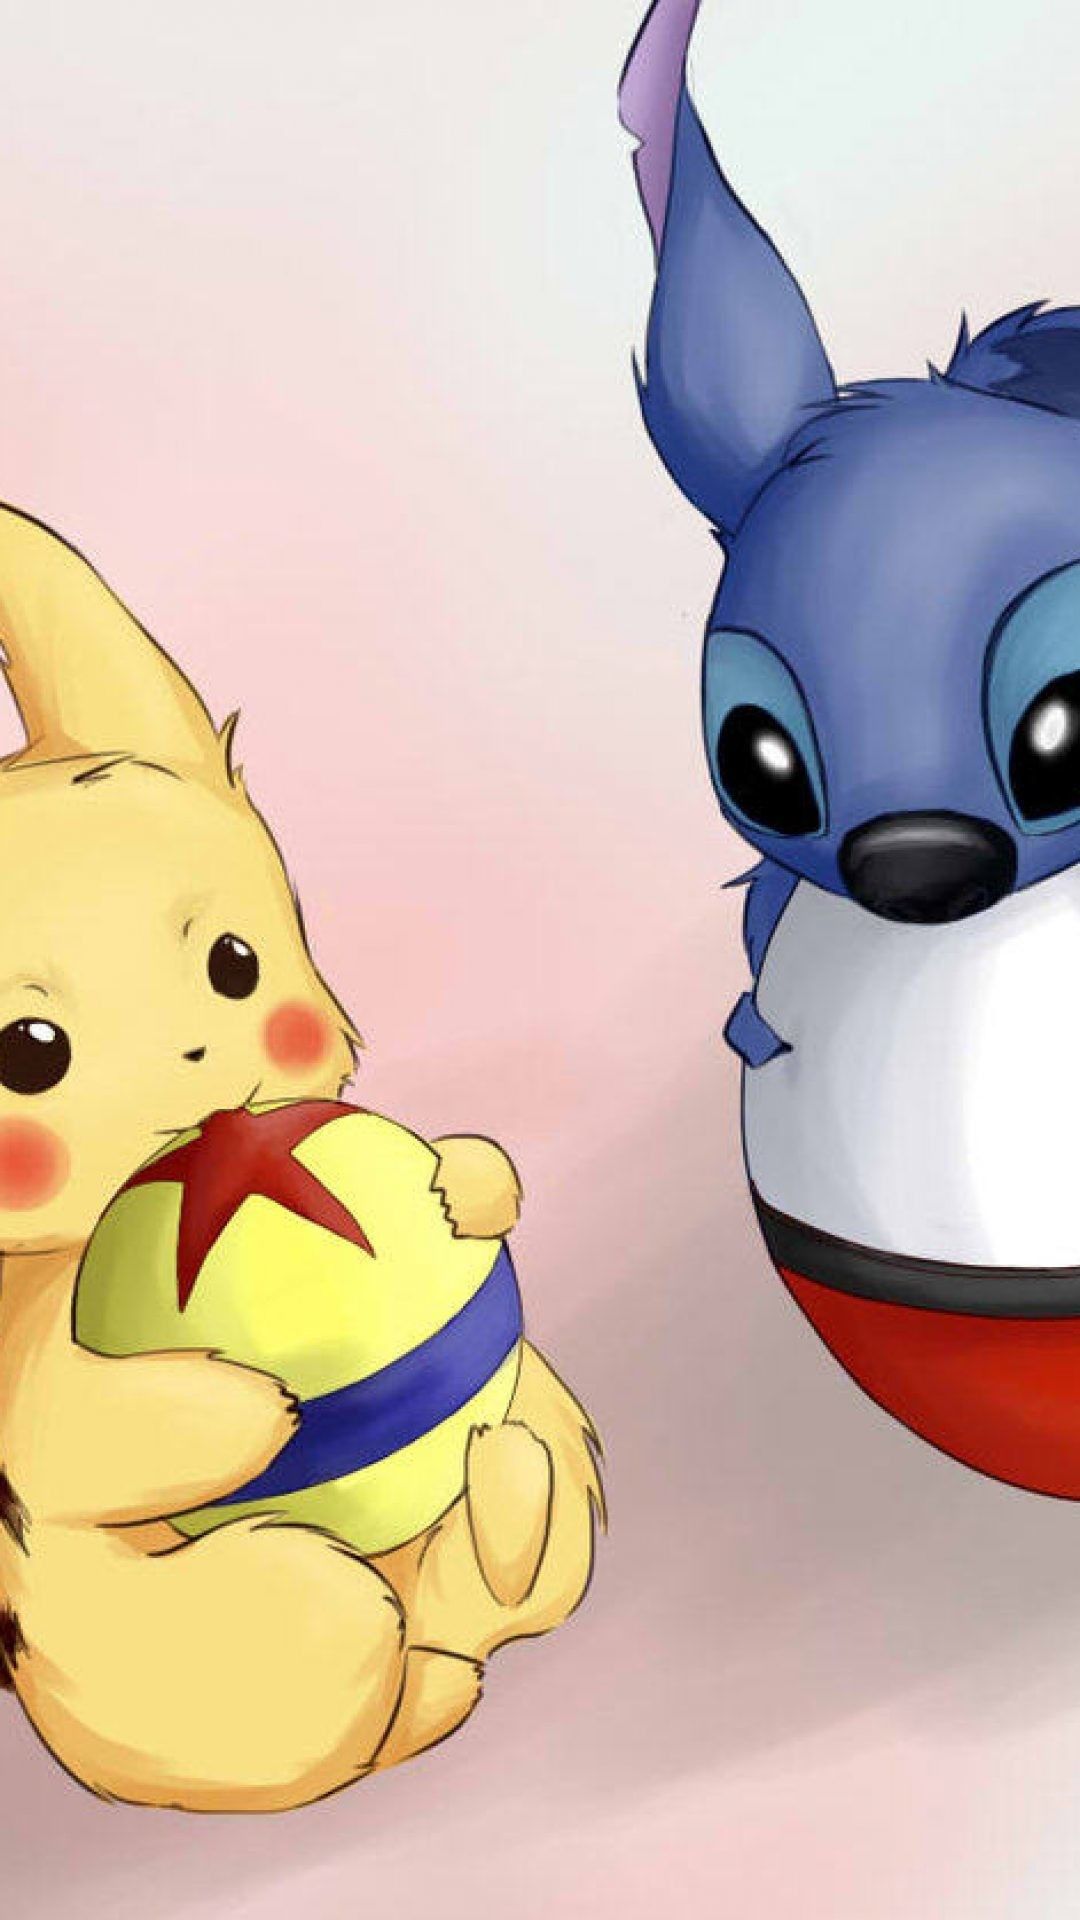 The pikachu and pokemon are playing with a ball - Pikachu